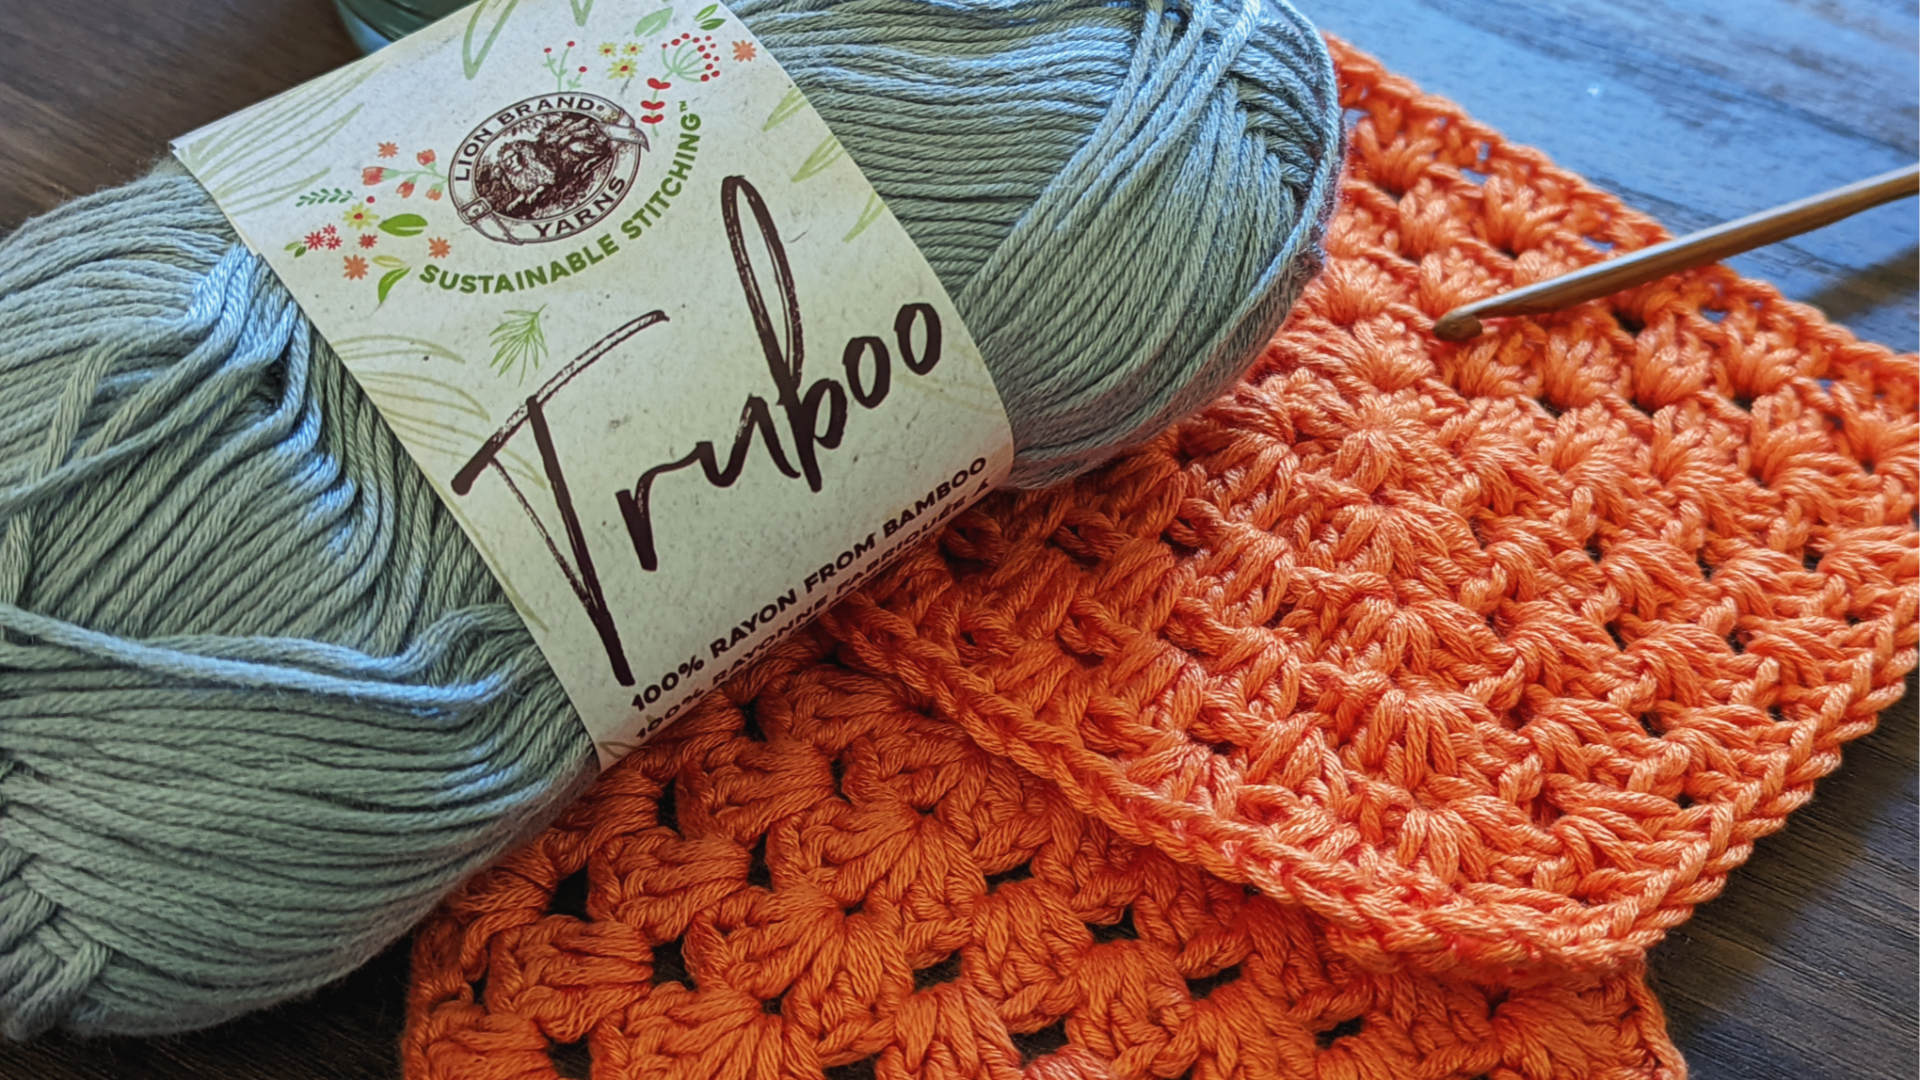 Yarn Review: Lion Brand Color Made Easy - Yay For Yarn